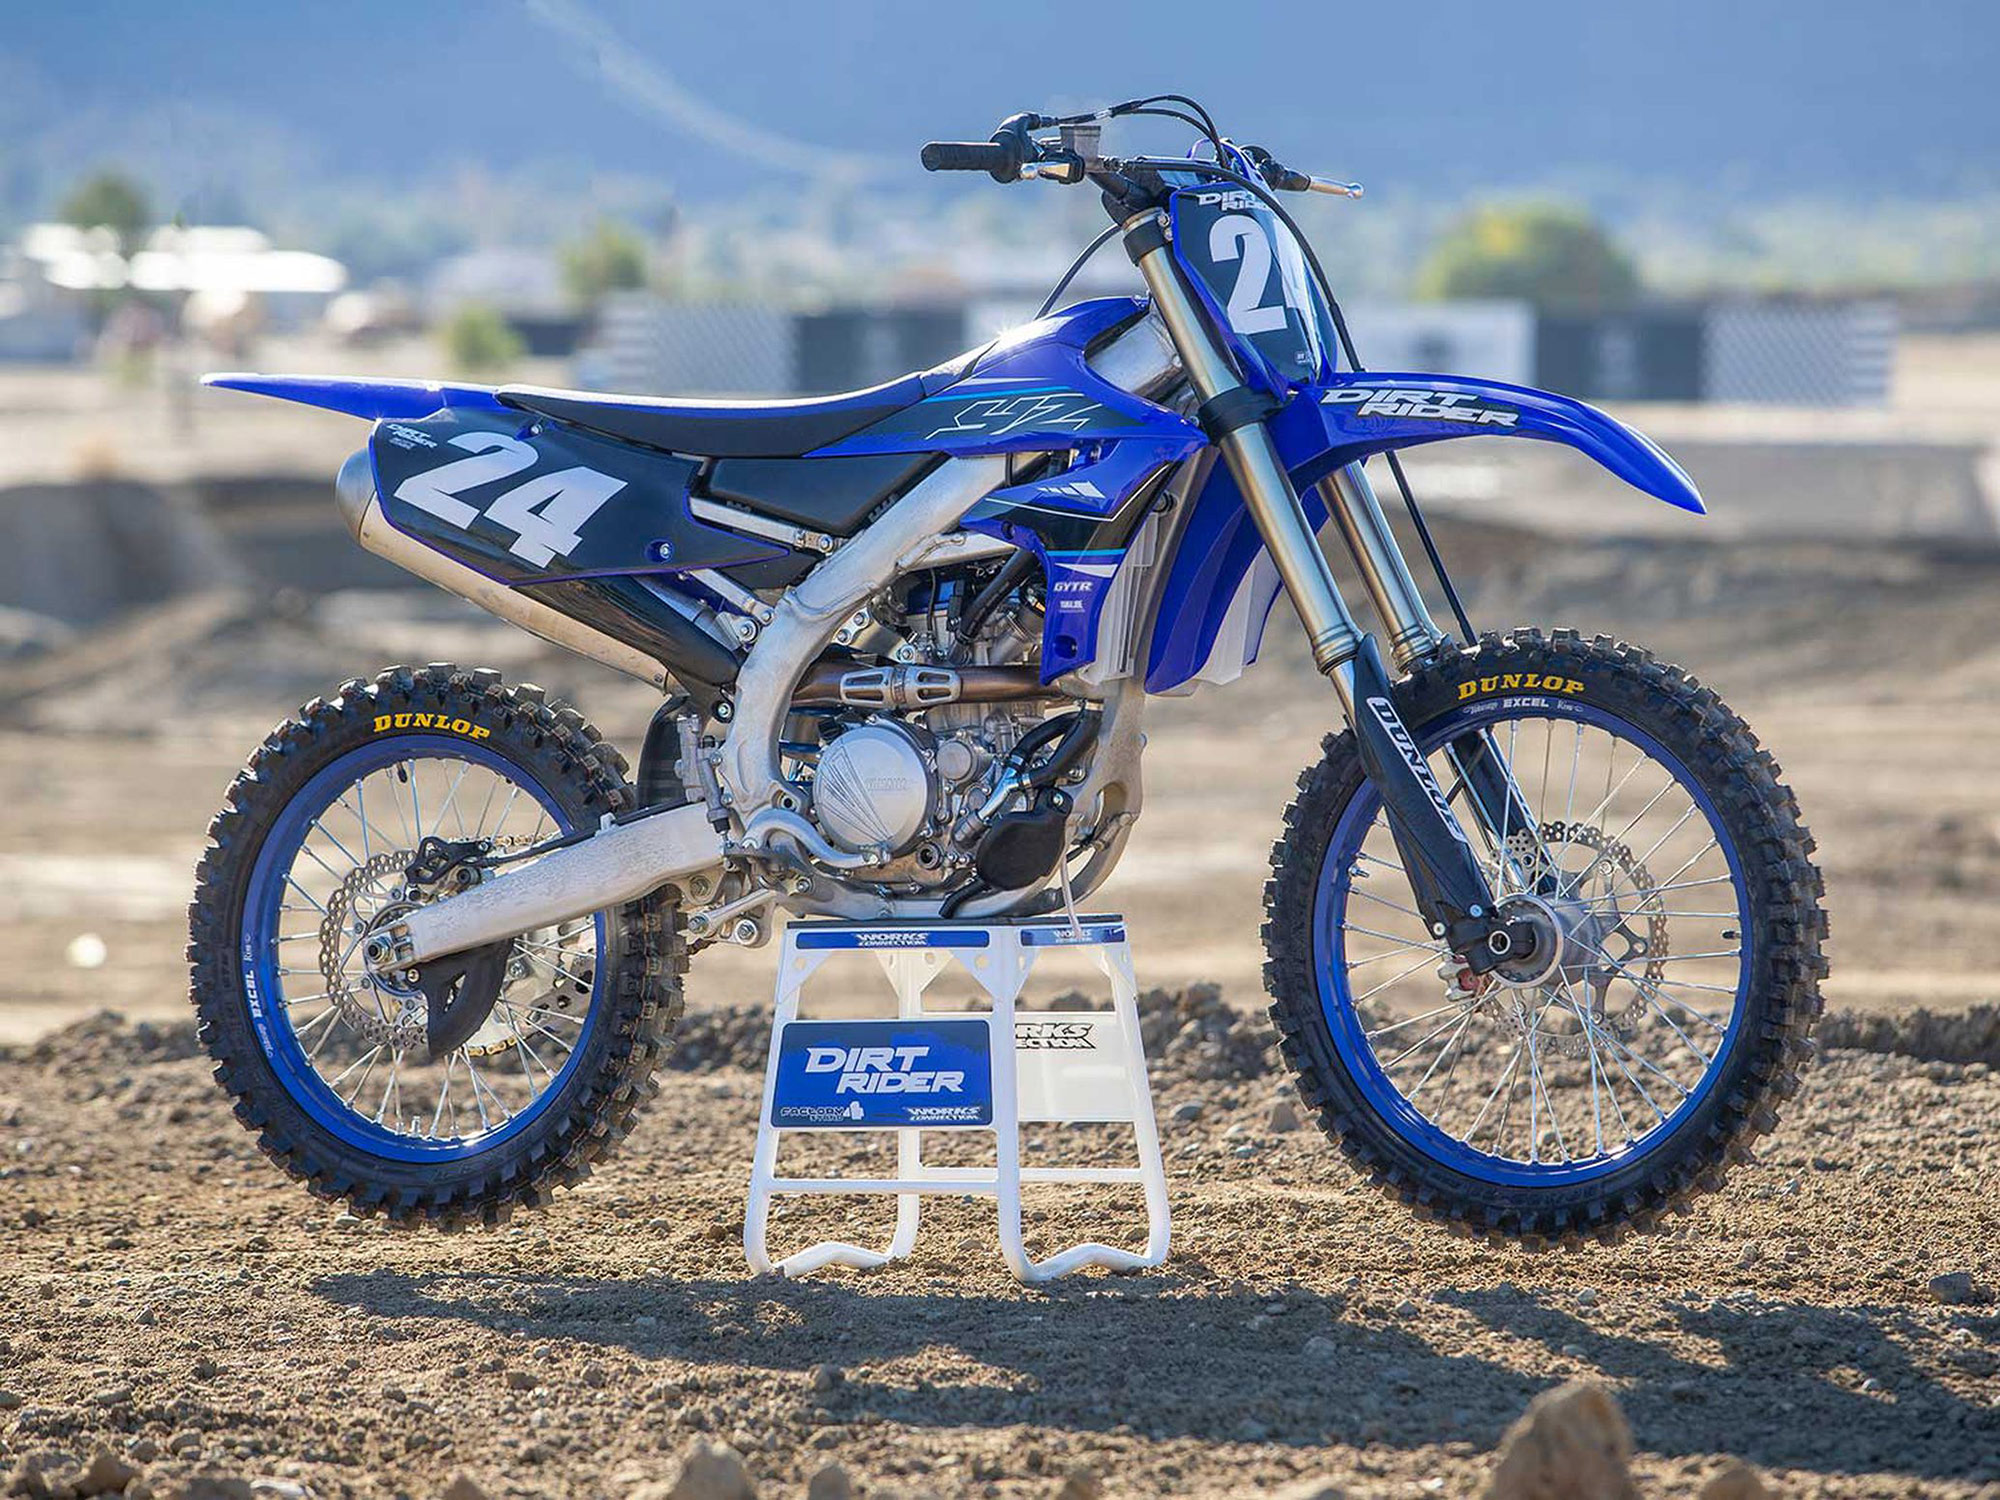 2021 Yamaha Yz250F Buyer'S Guide: Specs, Photos, Price | Cycle World